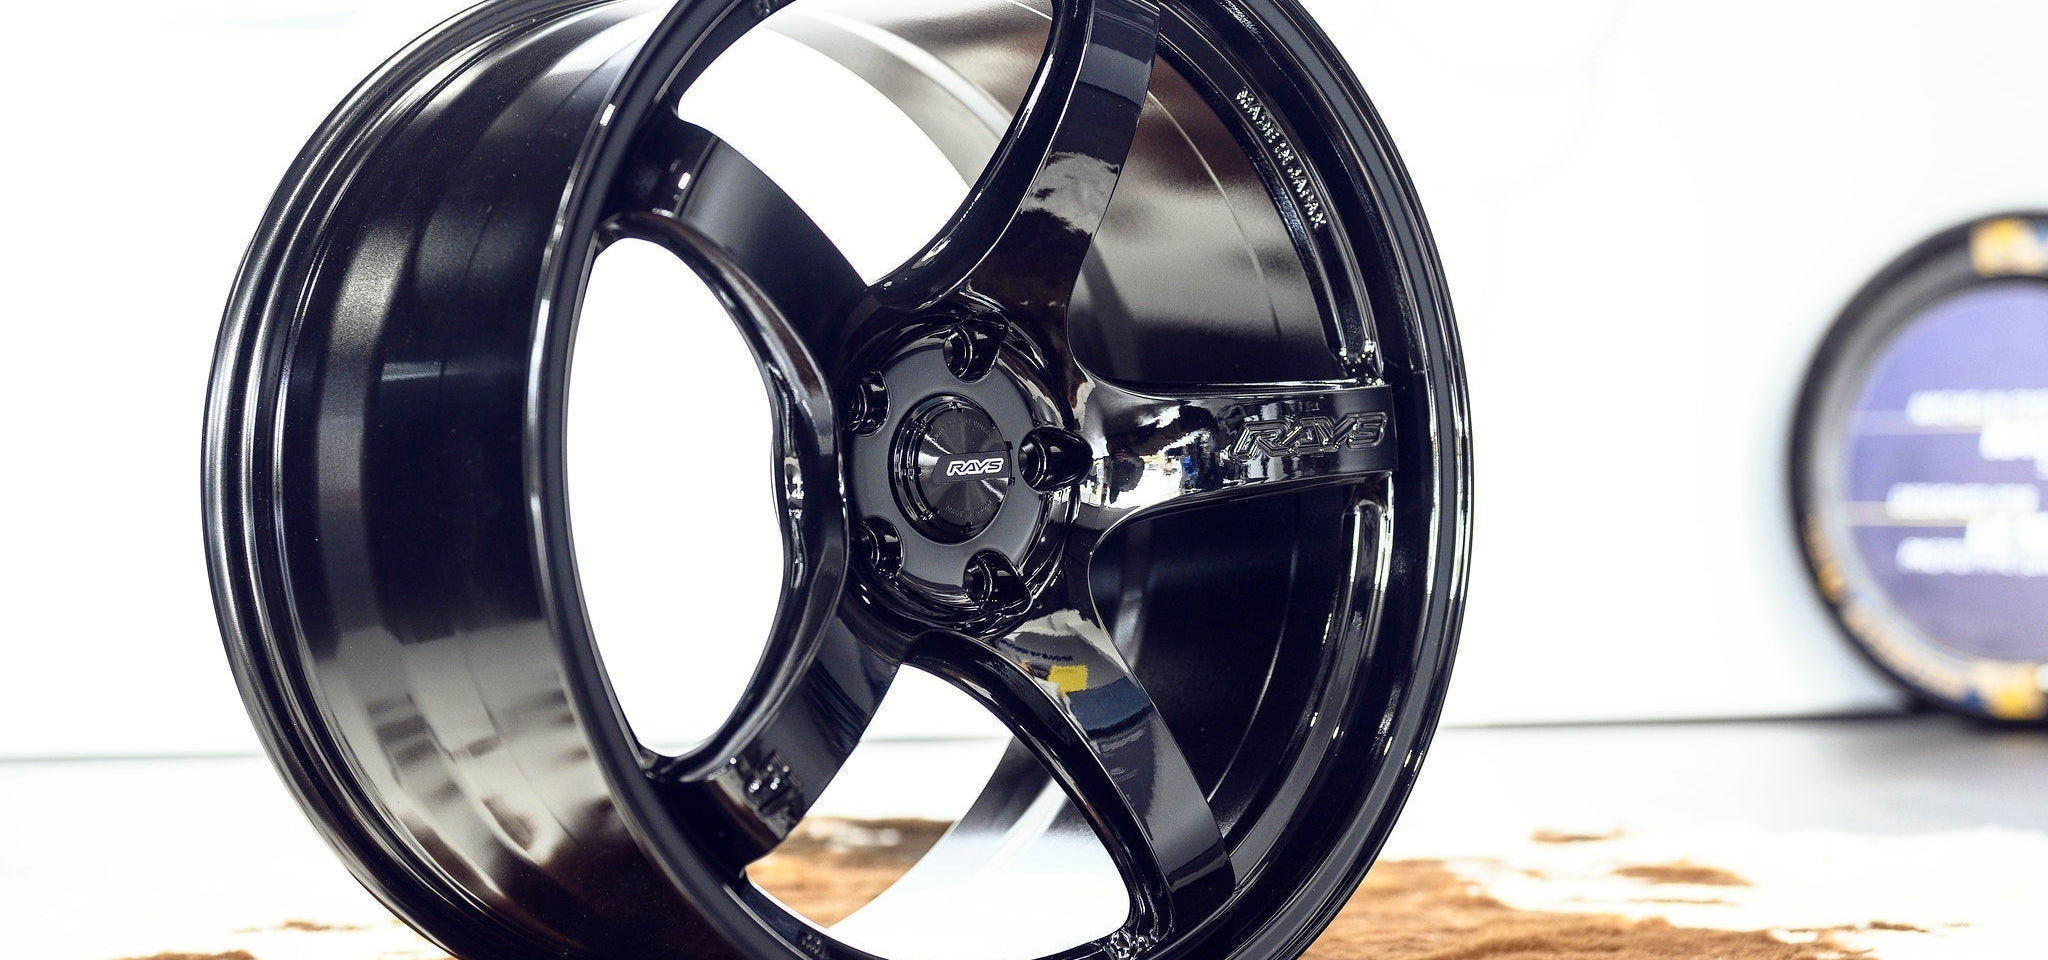 gramLIGHTS 57CR 15" - Premium Wheels from Gram Lights - From just $1790.0! Shop now at MK MOTORSPORTS